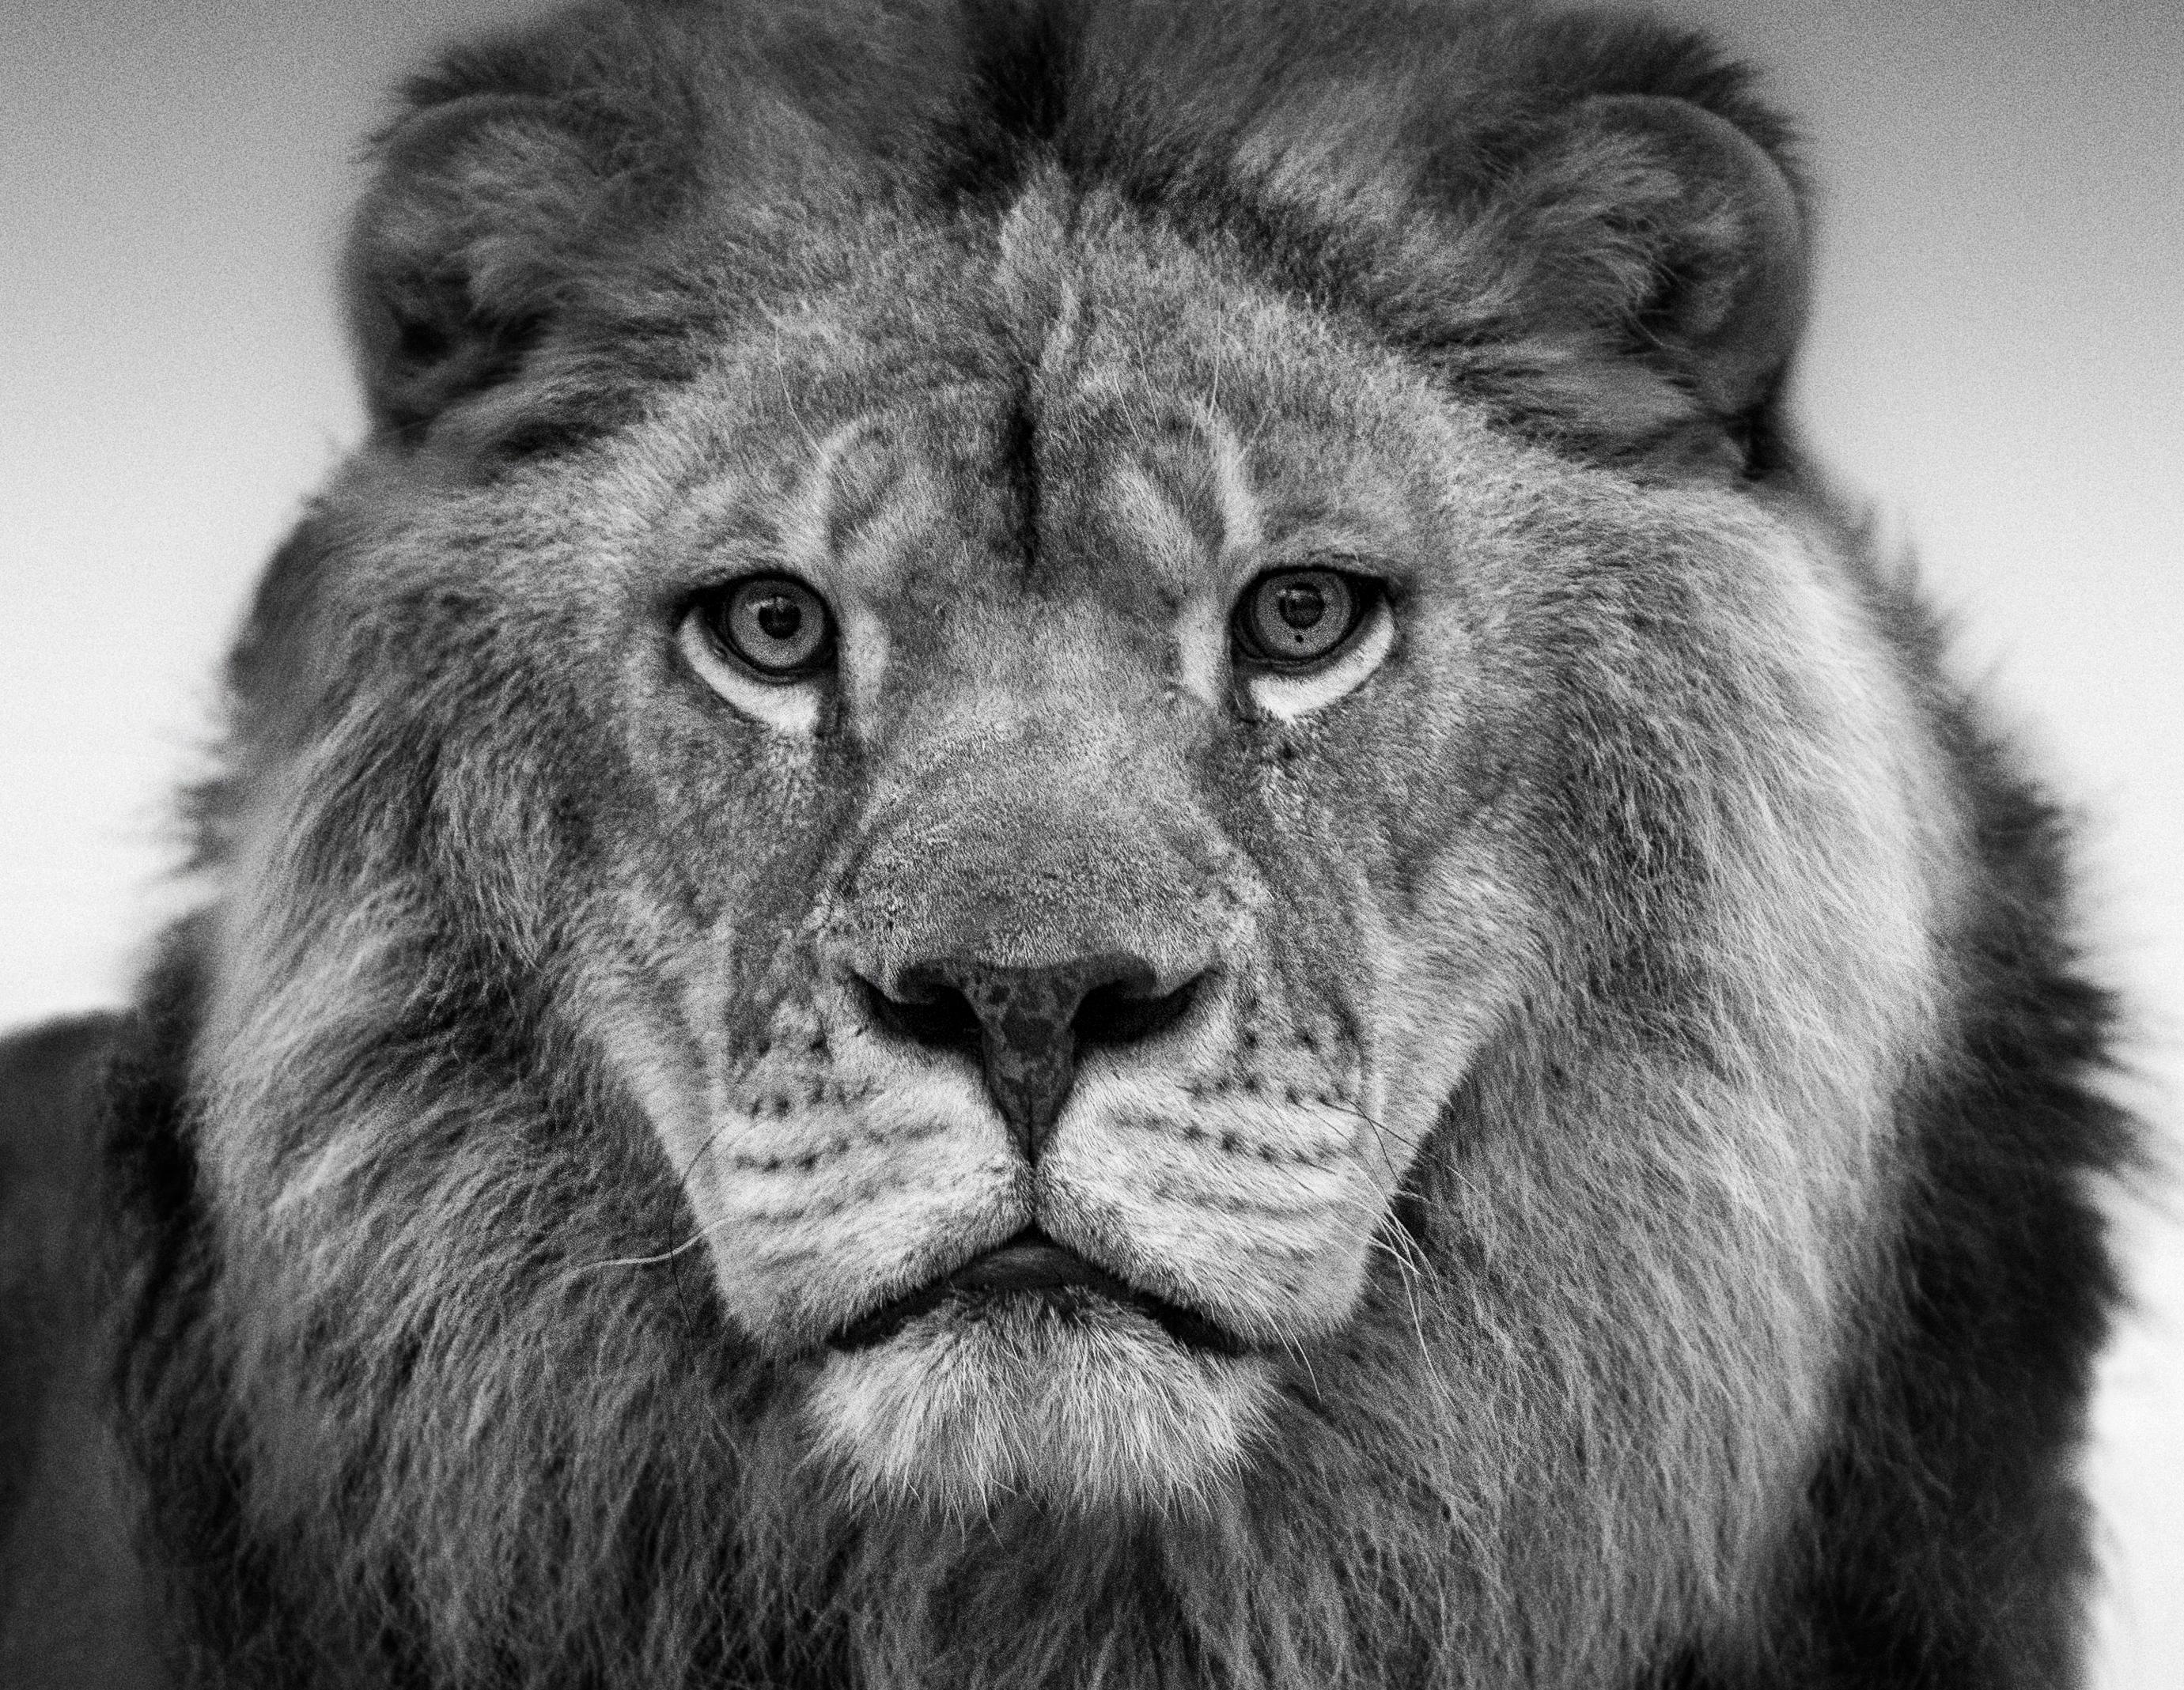 This is a contemporary photograph of an African Lion. 
36x48
Edition of 12

Shane Russeck is a modern day photographer, adventurer, and explorer. He first picked up a camera while training with legendary boxing trainer Freddie Roach at the world